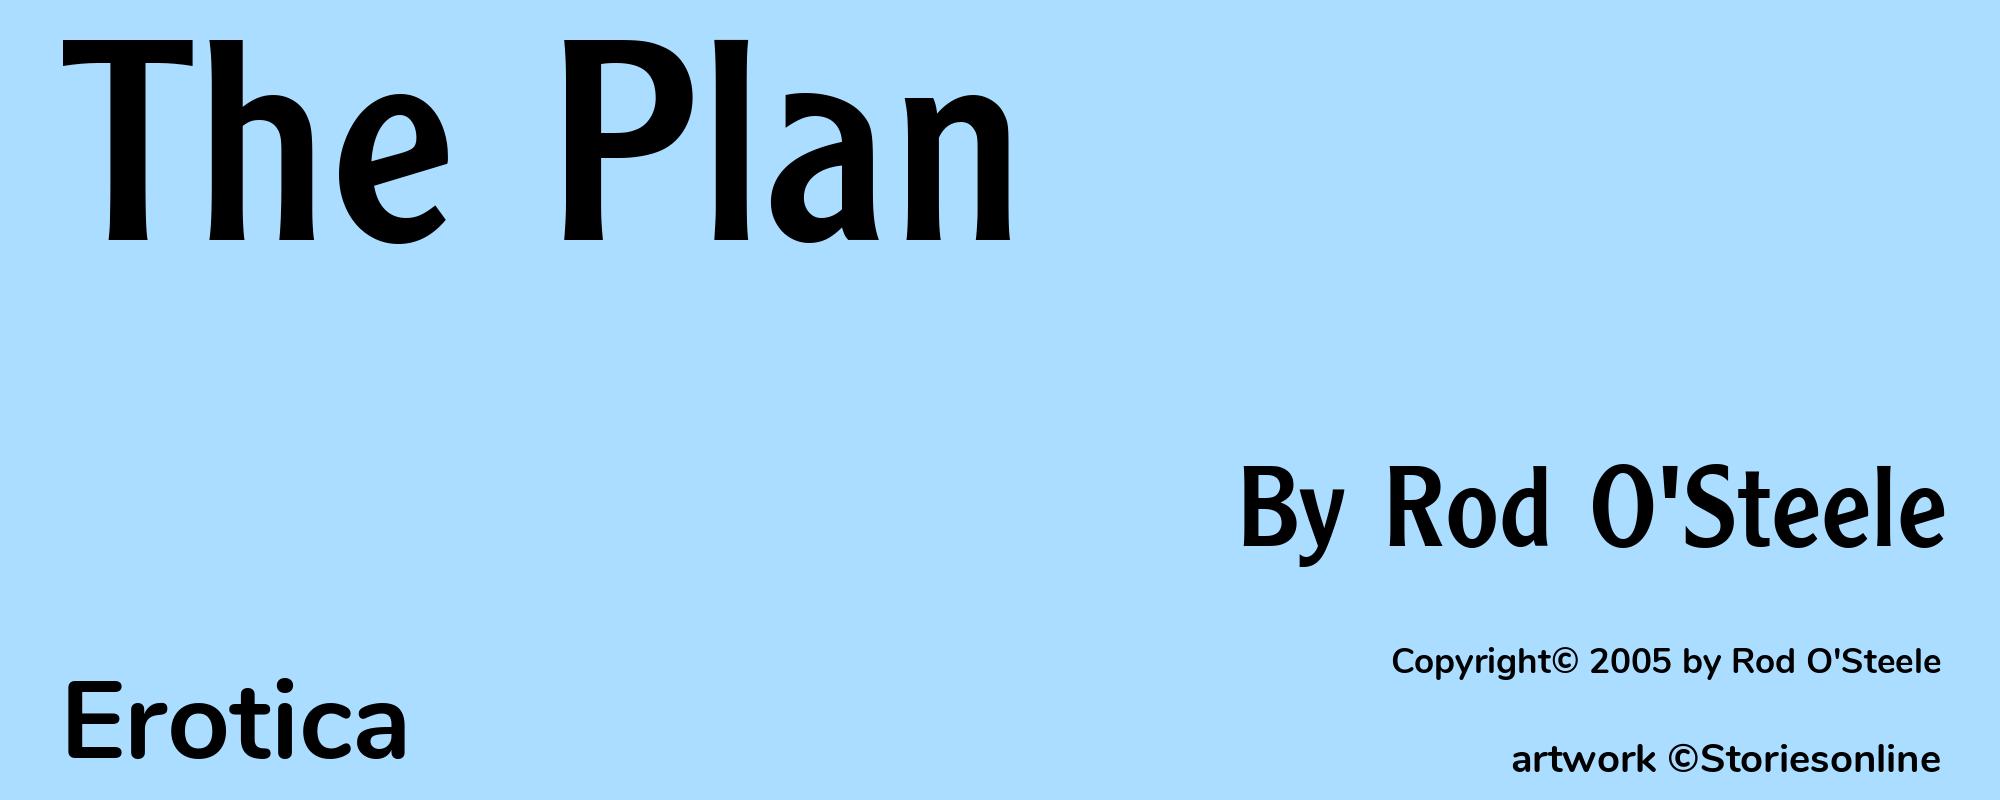 The Plan - Cover